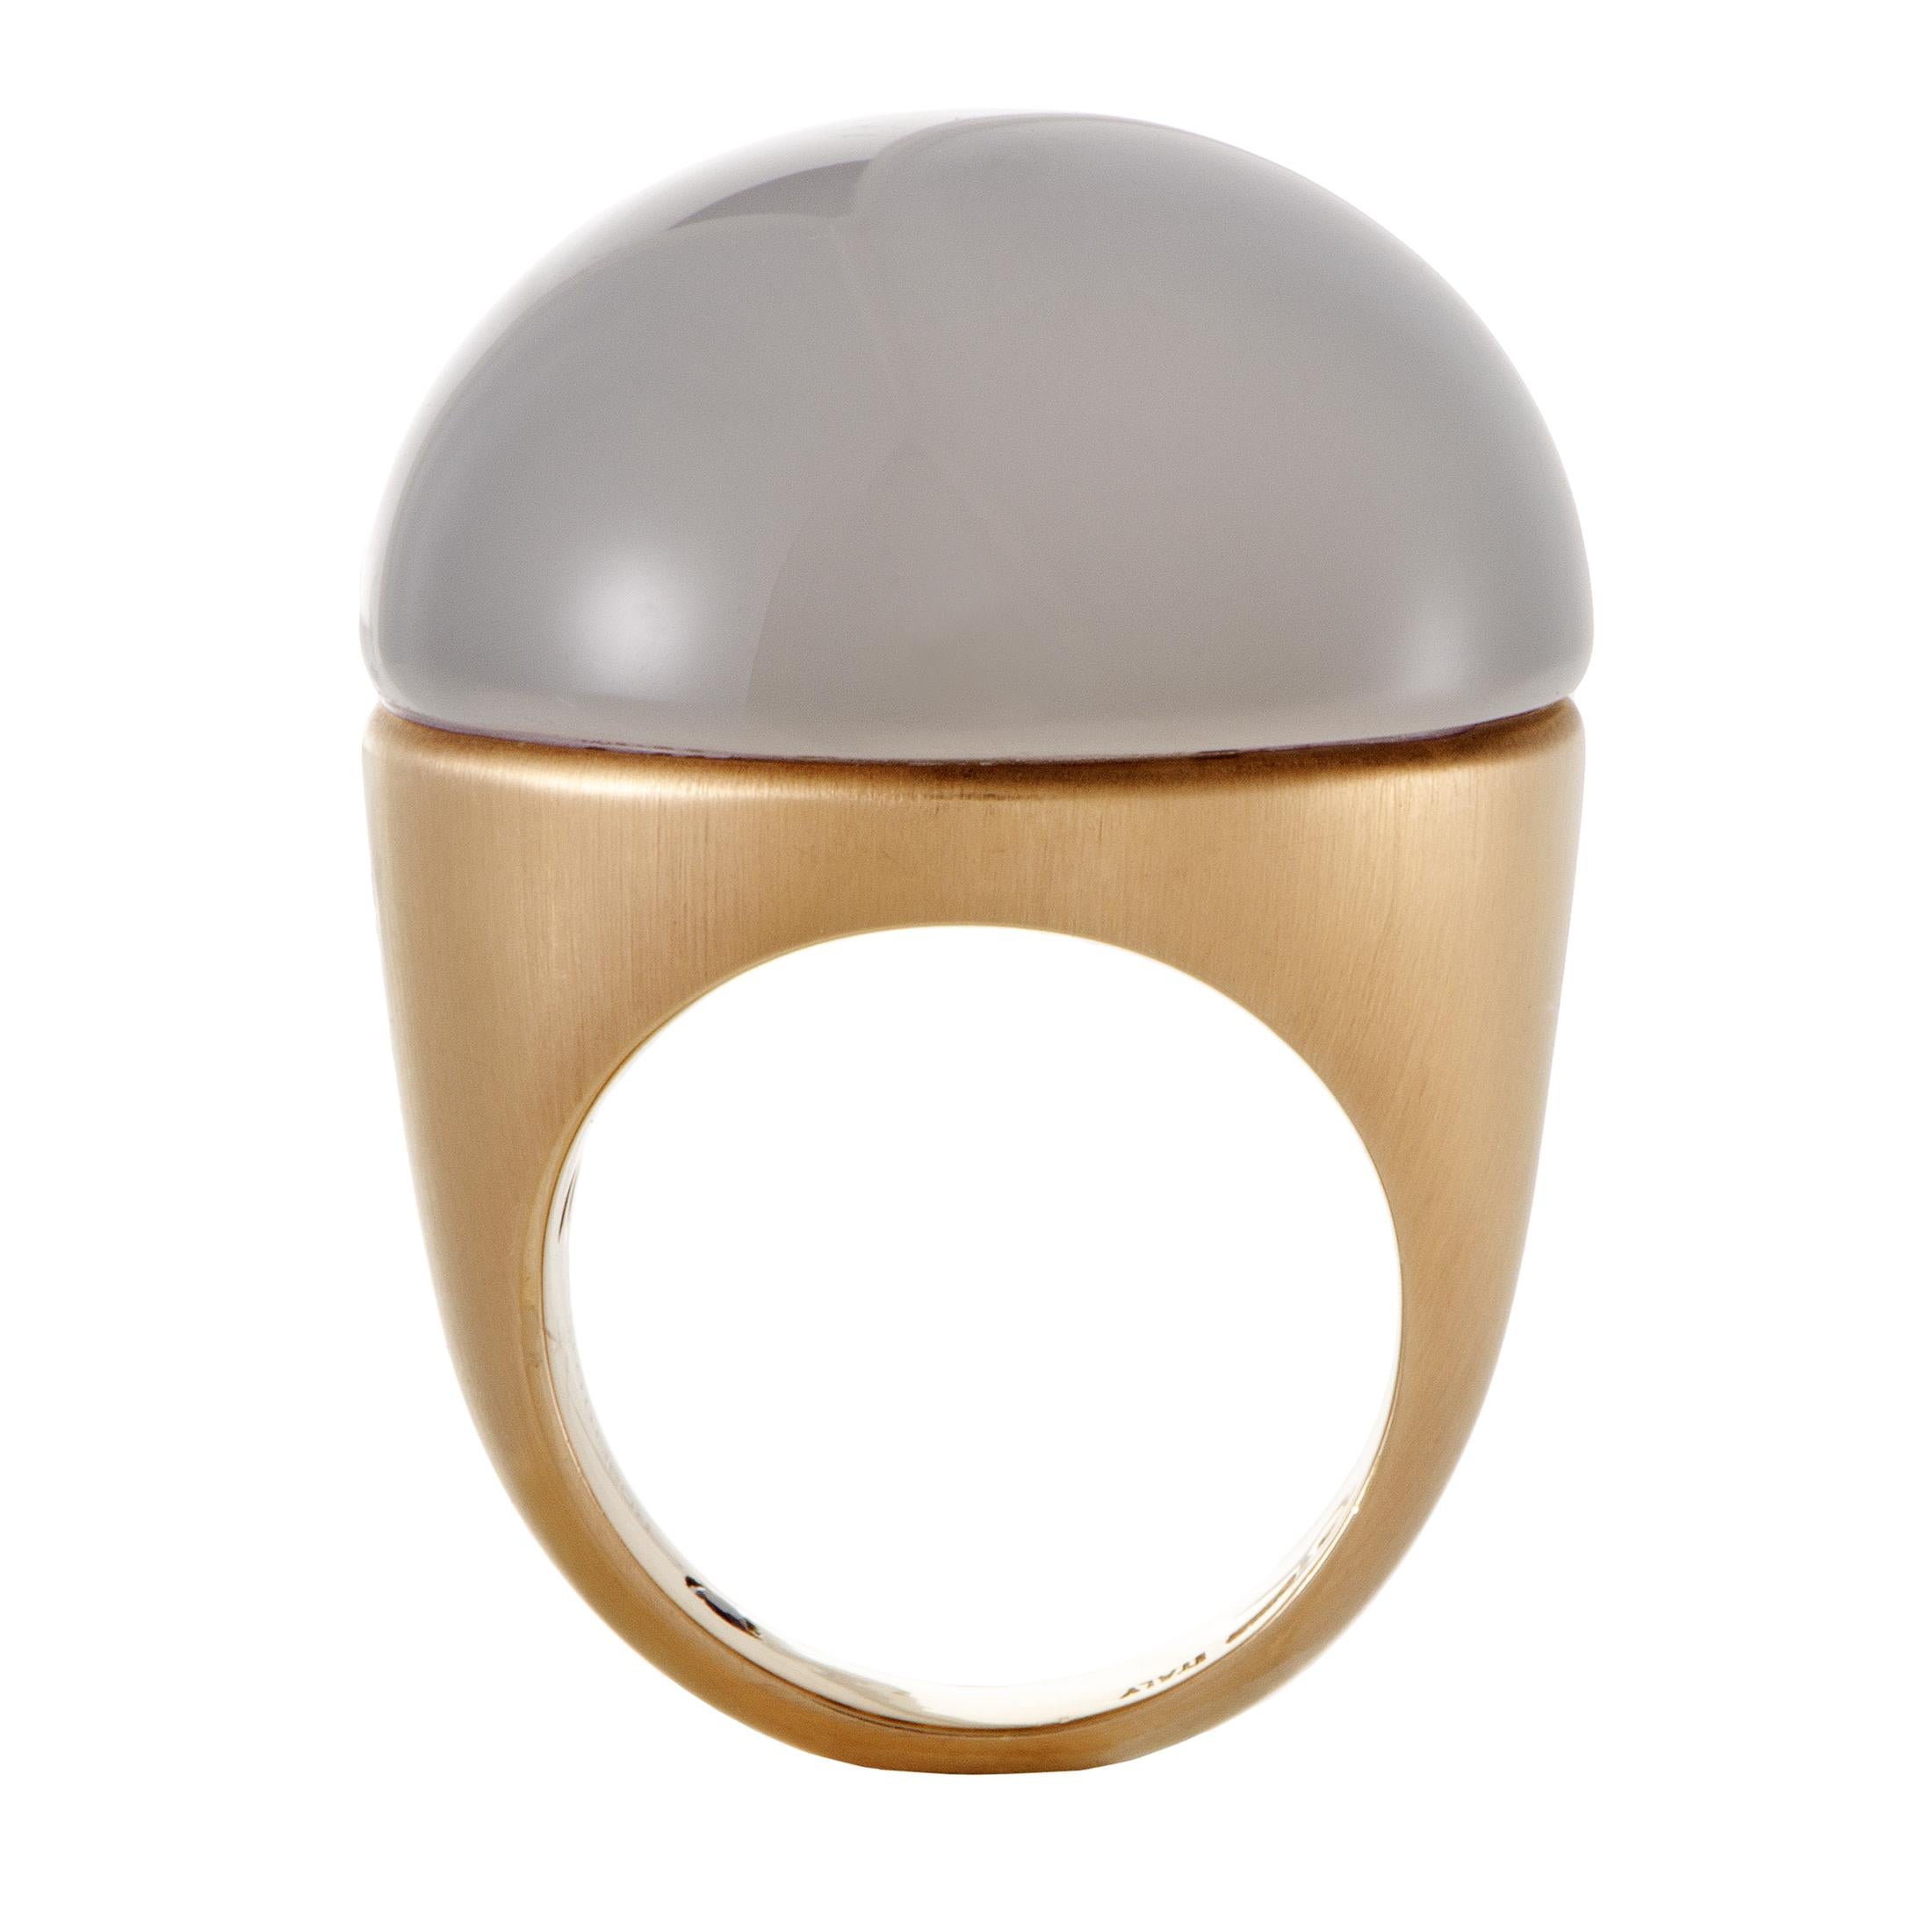 Astounding with its deep color, immaculate shape and sheer size, the fantastic milk paste onyx stone produces a memorable sight in this exceptional ring from Roberto Coin which is made of delightful 18K rose gold for gorgeous prestigious